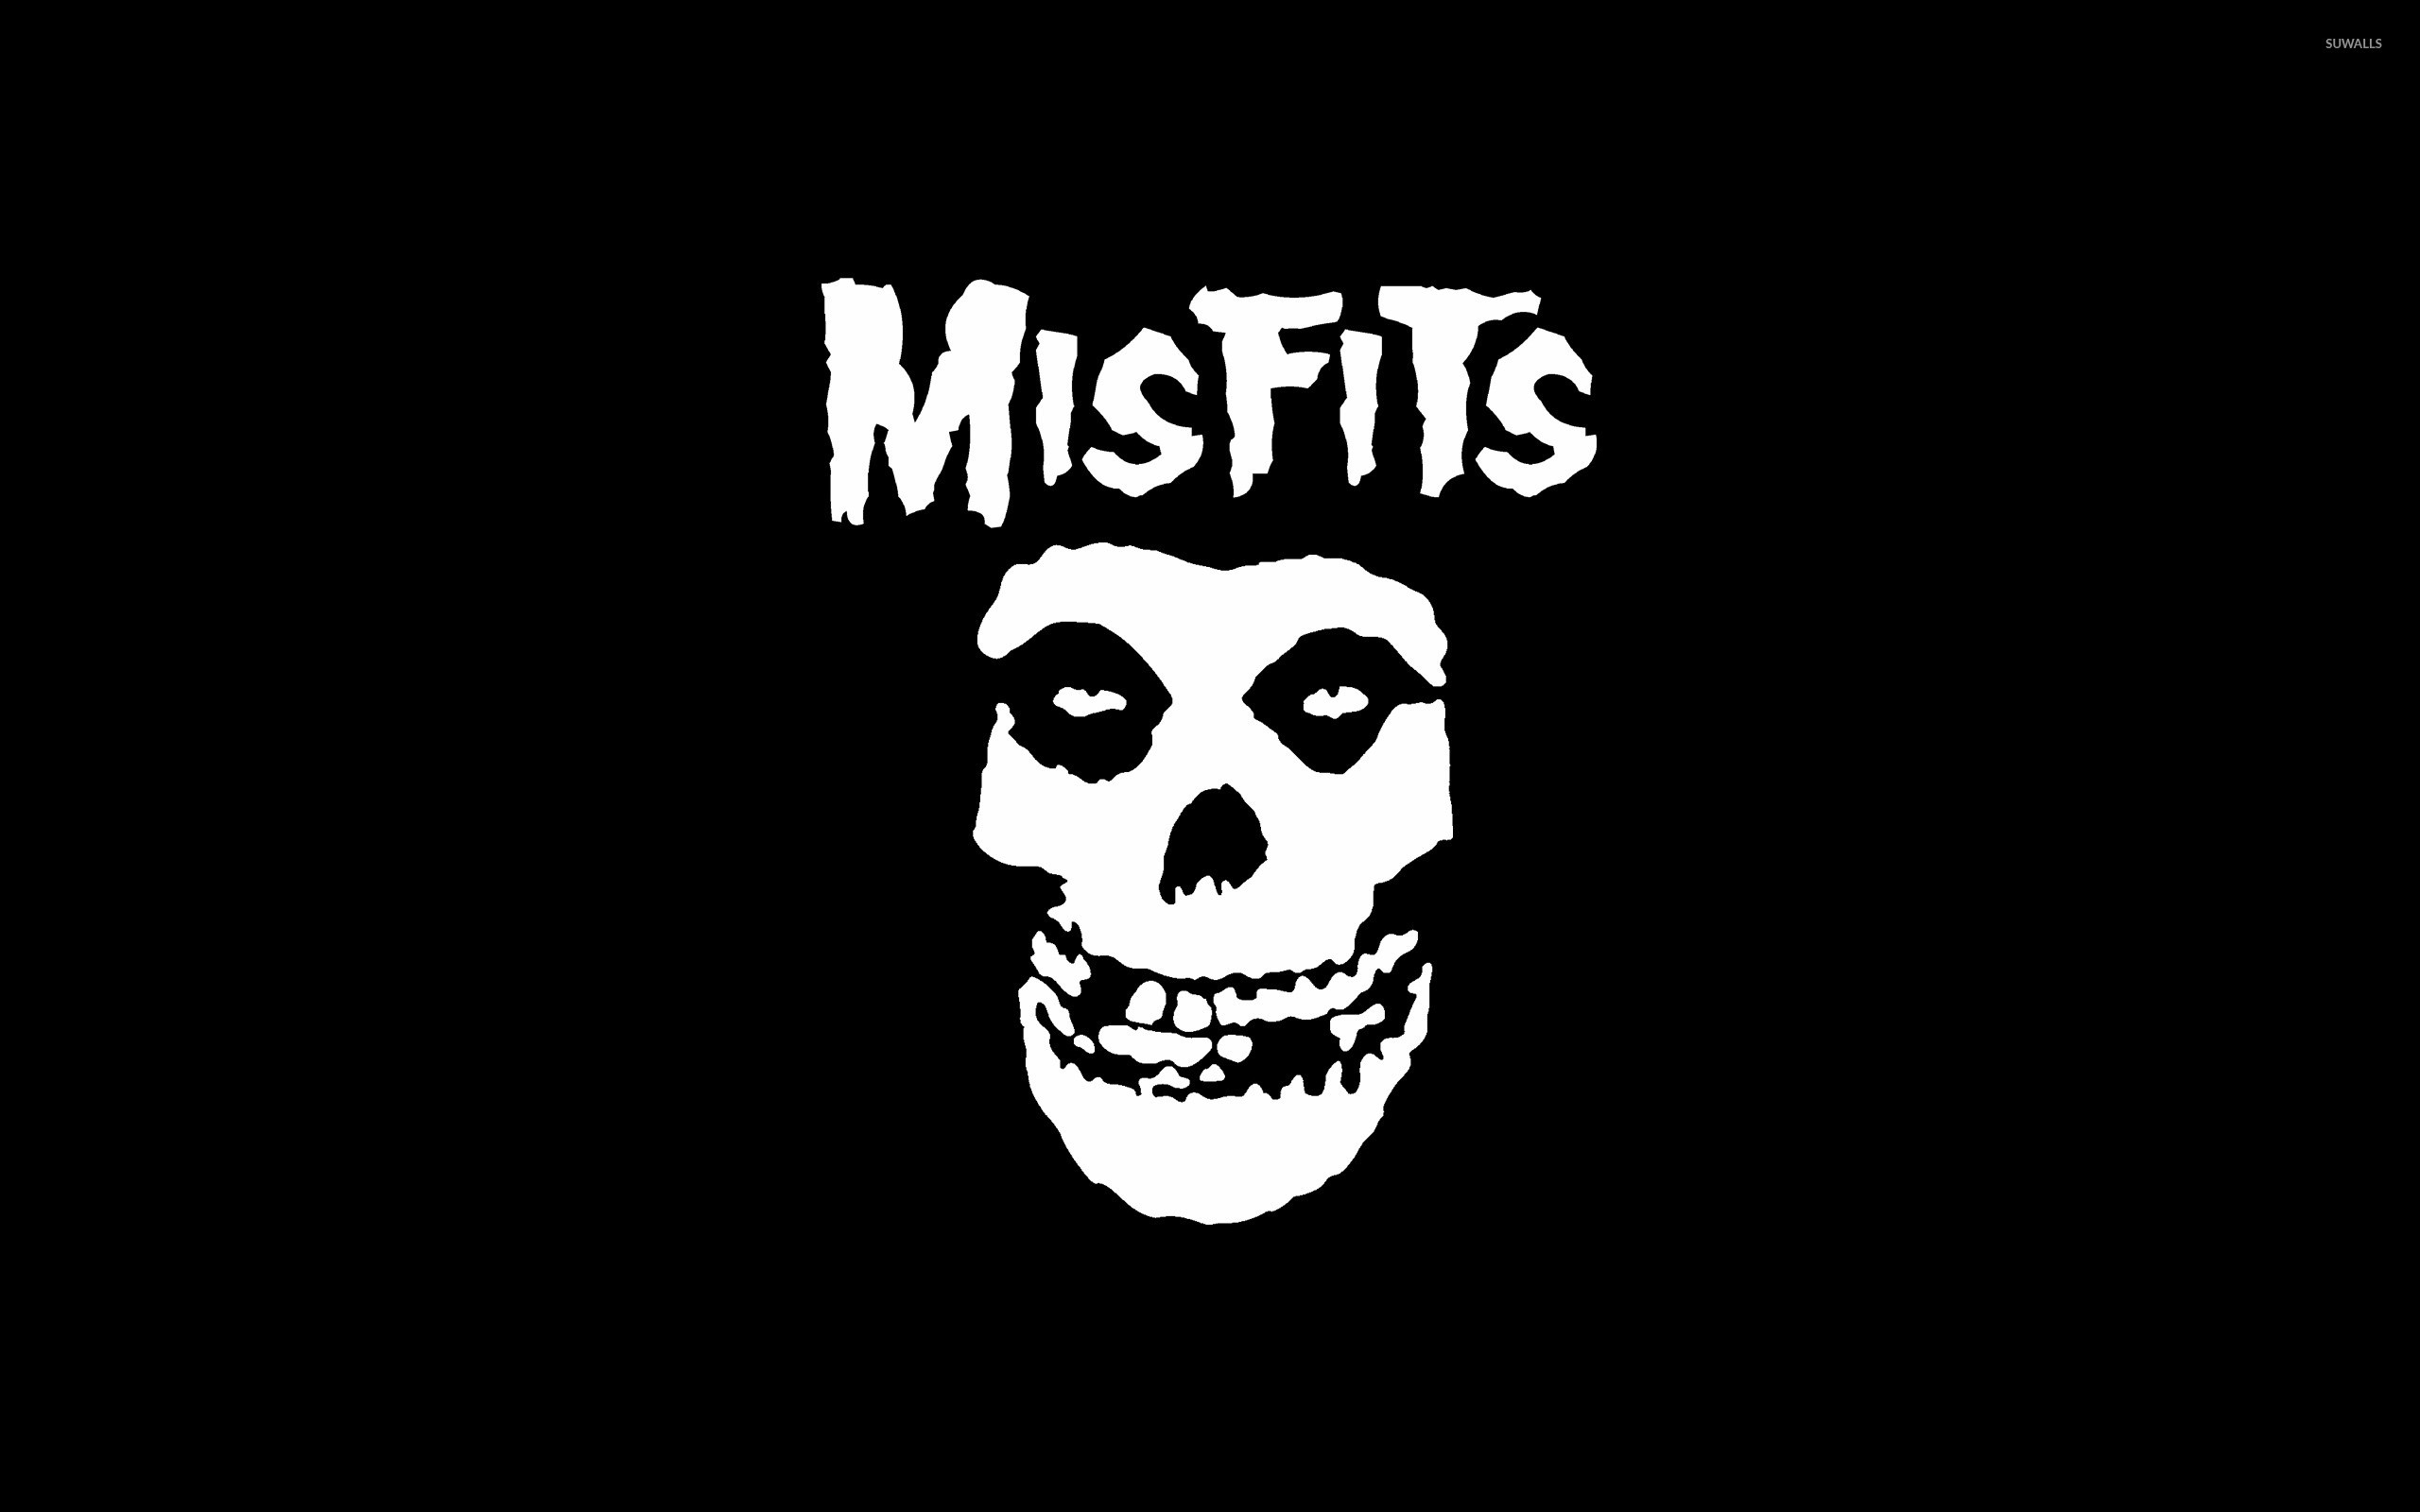 2560x1600 Download Misfits wallpapers to your cell phone misfits skull 2560Ã1600